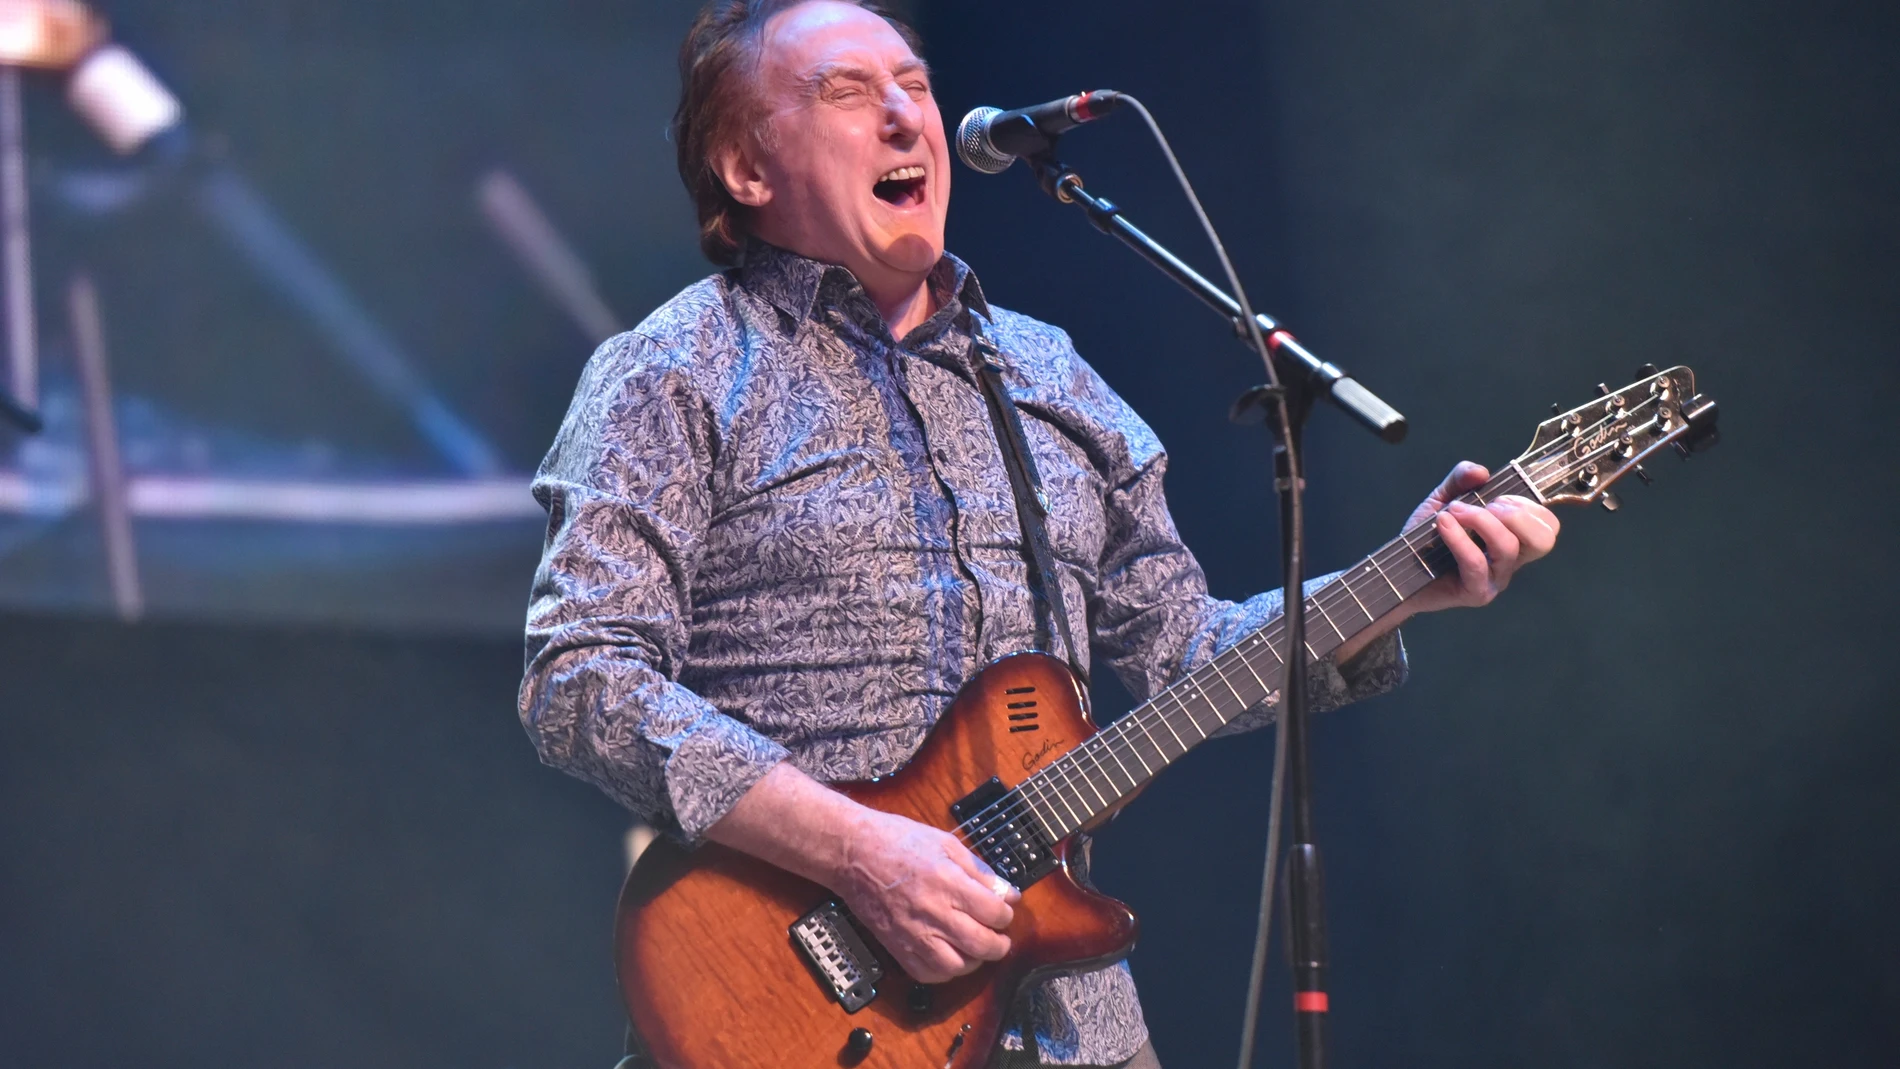 FILE - Denny Laine performs, Thursday Jan, 17, 2019, at the Arcada Theatre in St. Charles, Ill. Laine, a British singer, songwriter and guitarist who performed in an early, pop-oriented version of the Moody Blues and was later Paul McCartney’s longtime sideman in the ex-Beatle’s solo band Wings, died Tuesday, Dec. 5, 2023, his wife said in a social media post. (Photo by Rob Grabowski/Invision/AP, File)